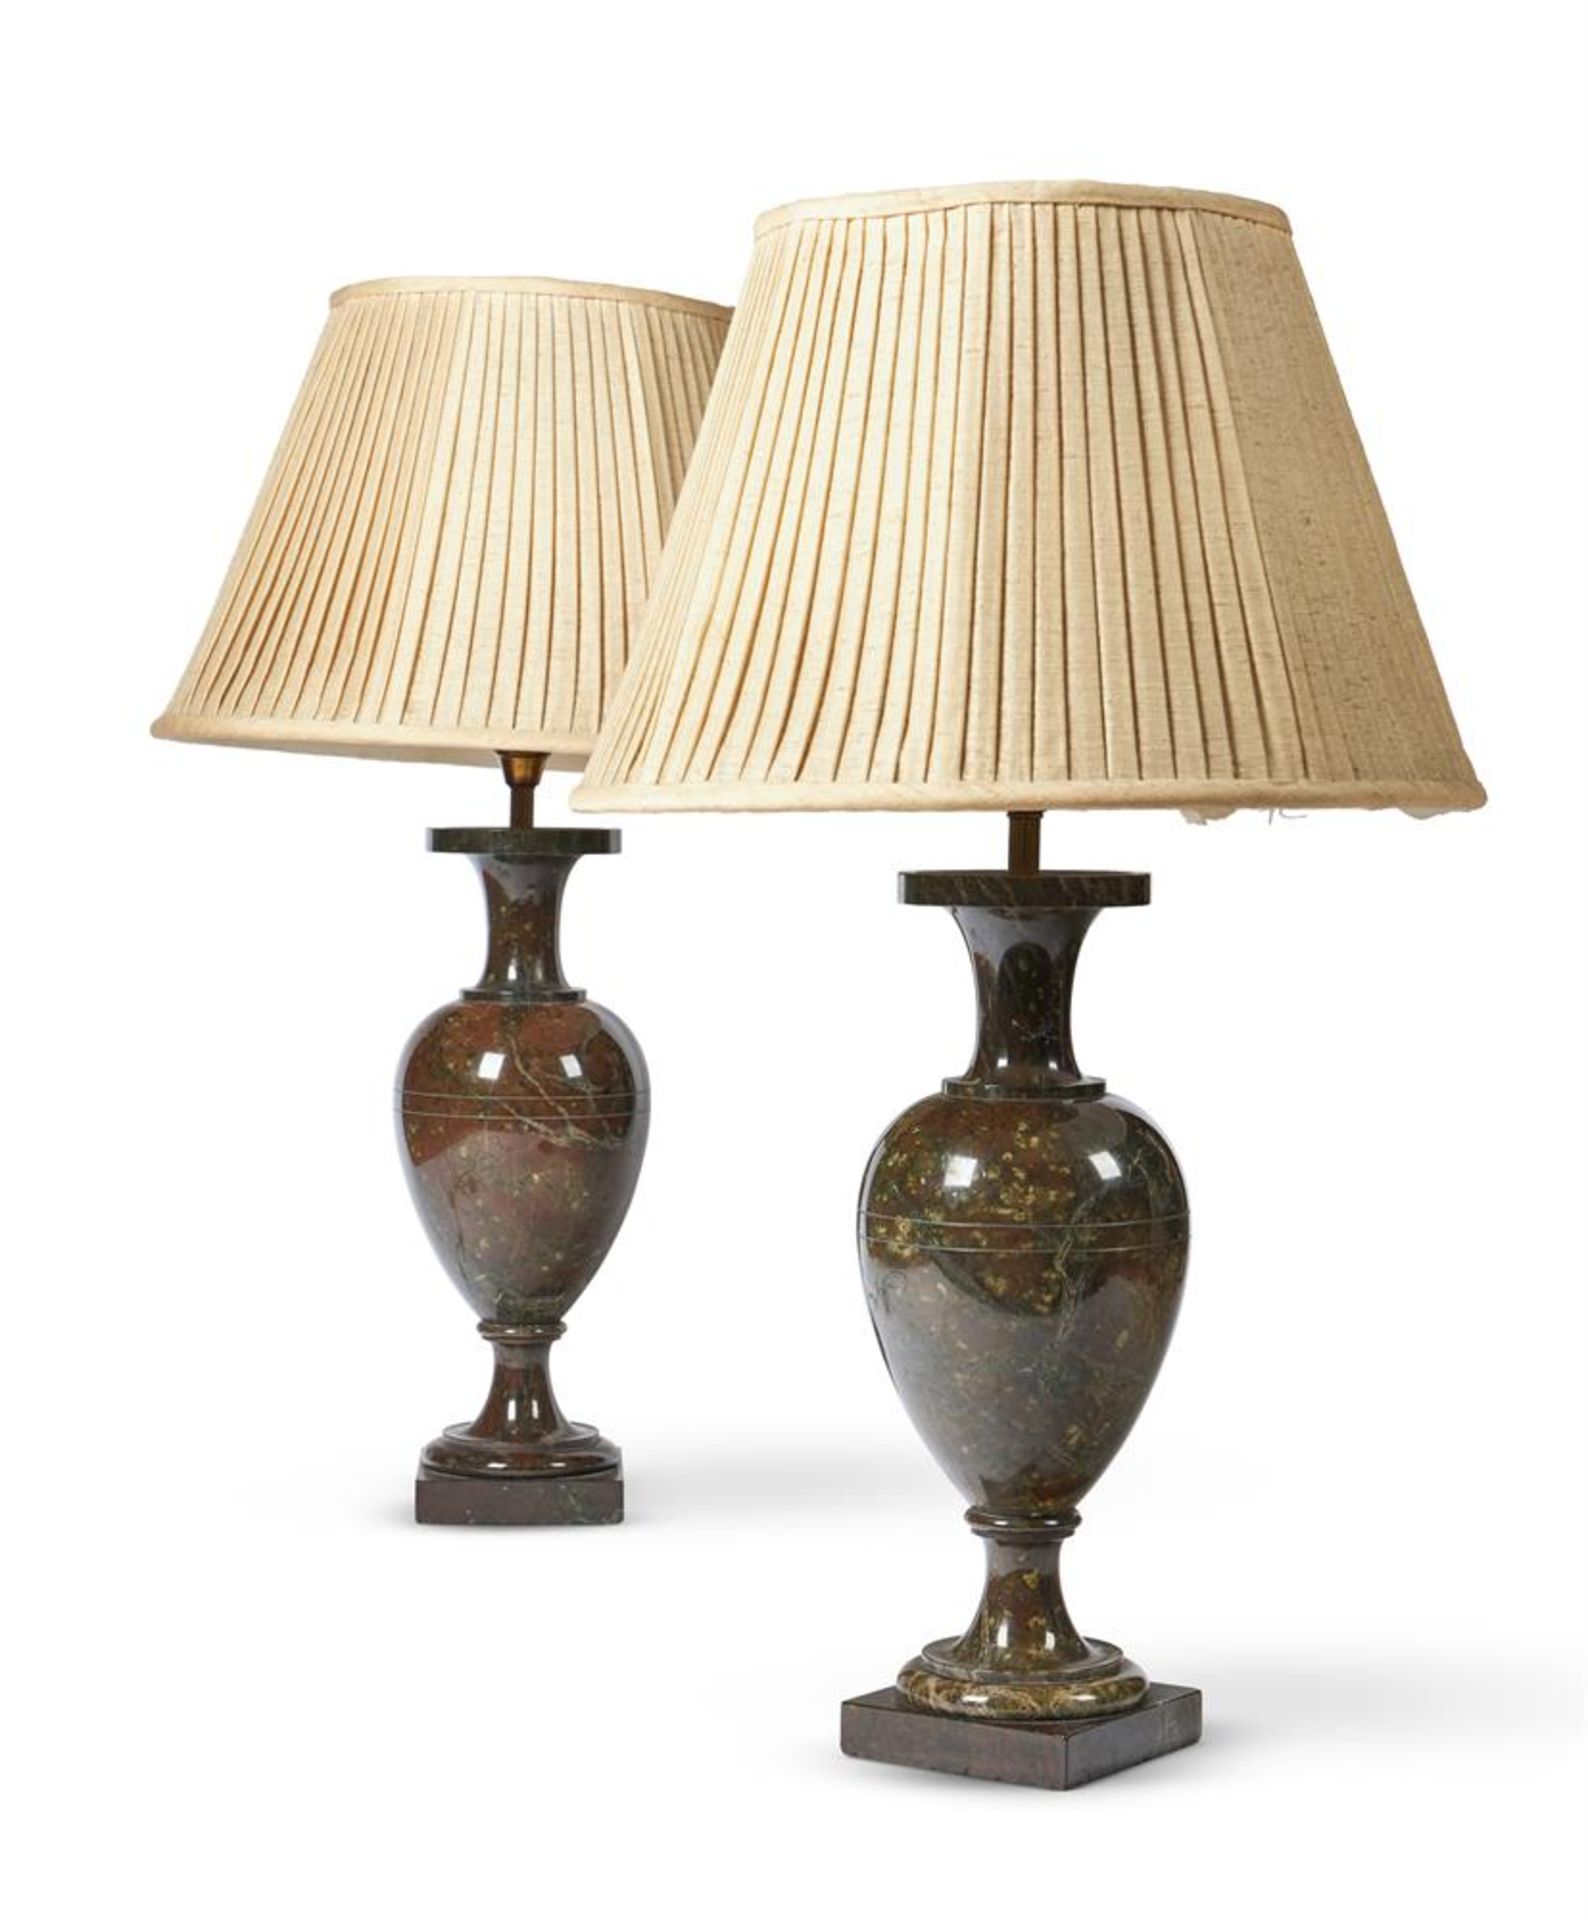 A PAIR OF TURNED SERPENTINE BALUSTER TABLE LAMPS, 20TH CENTURY